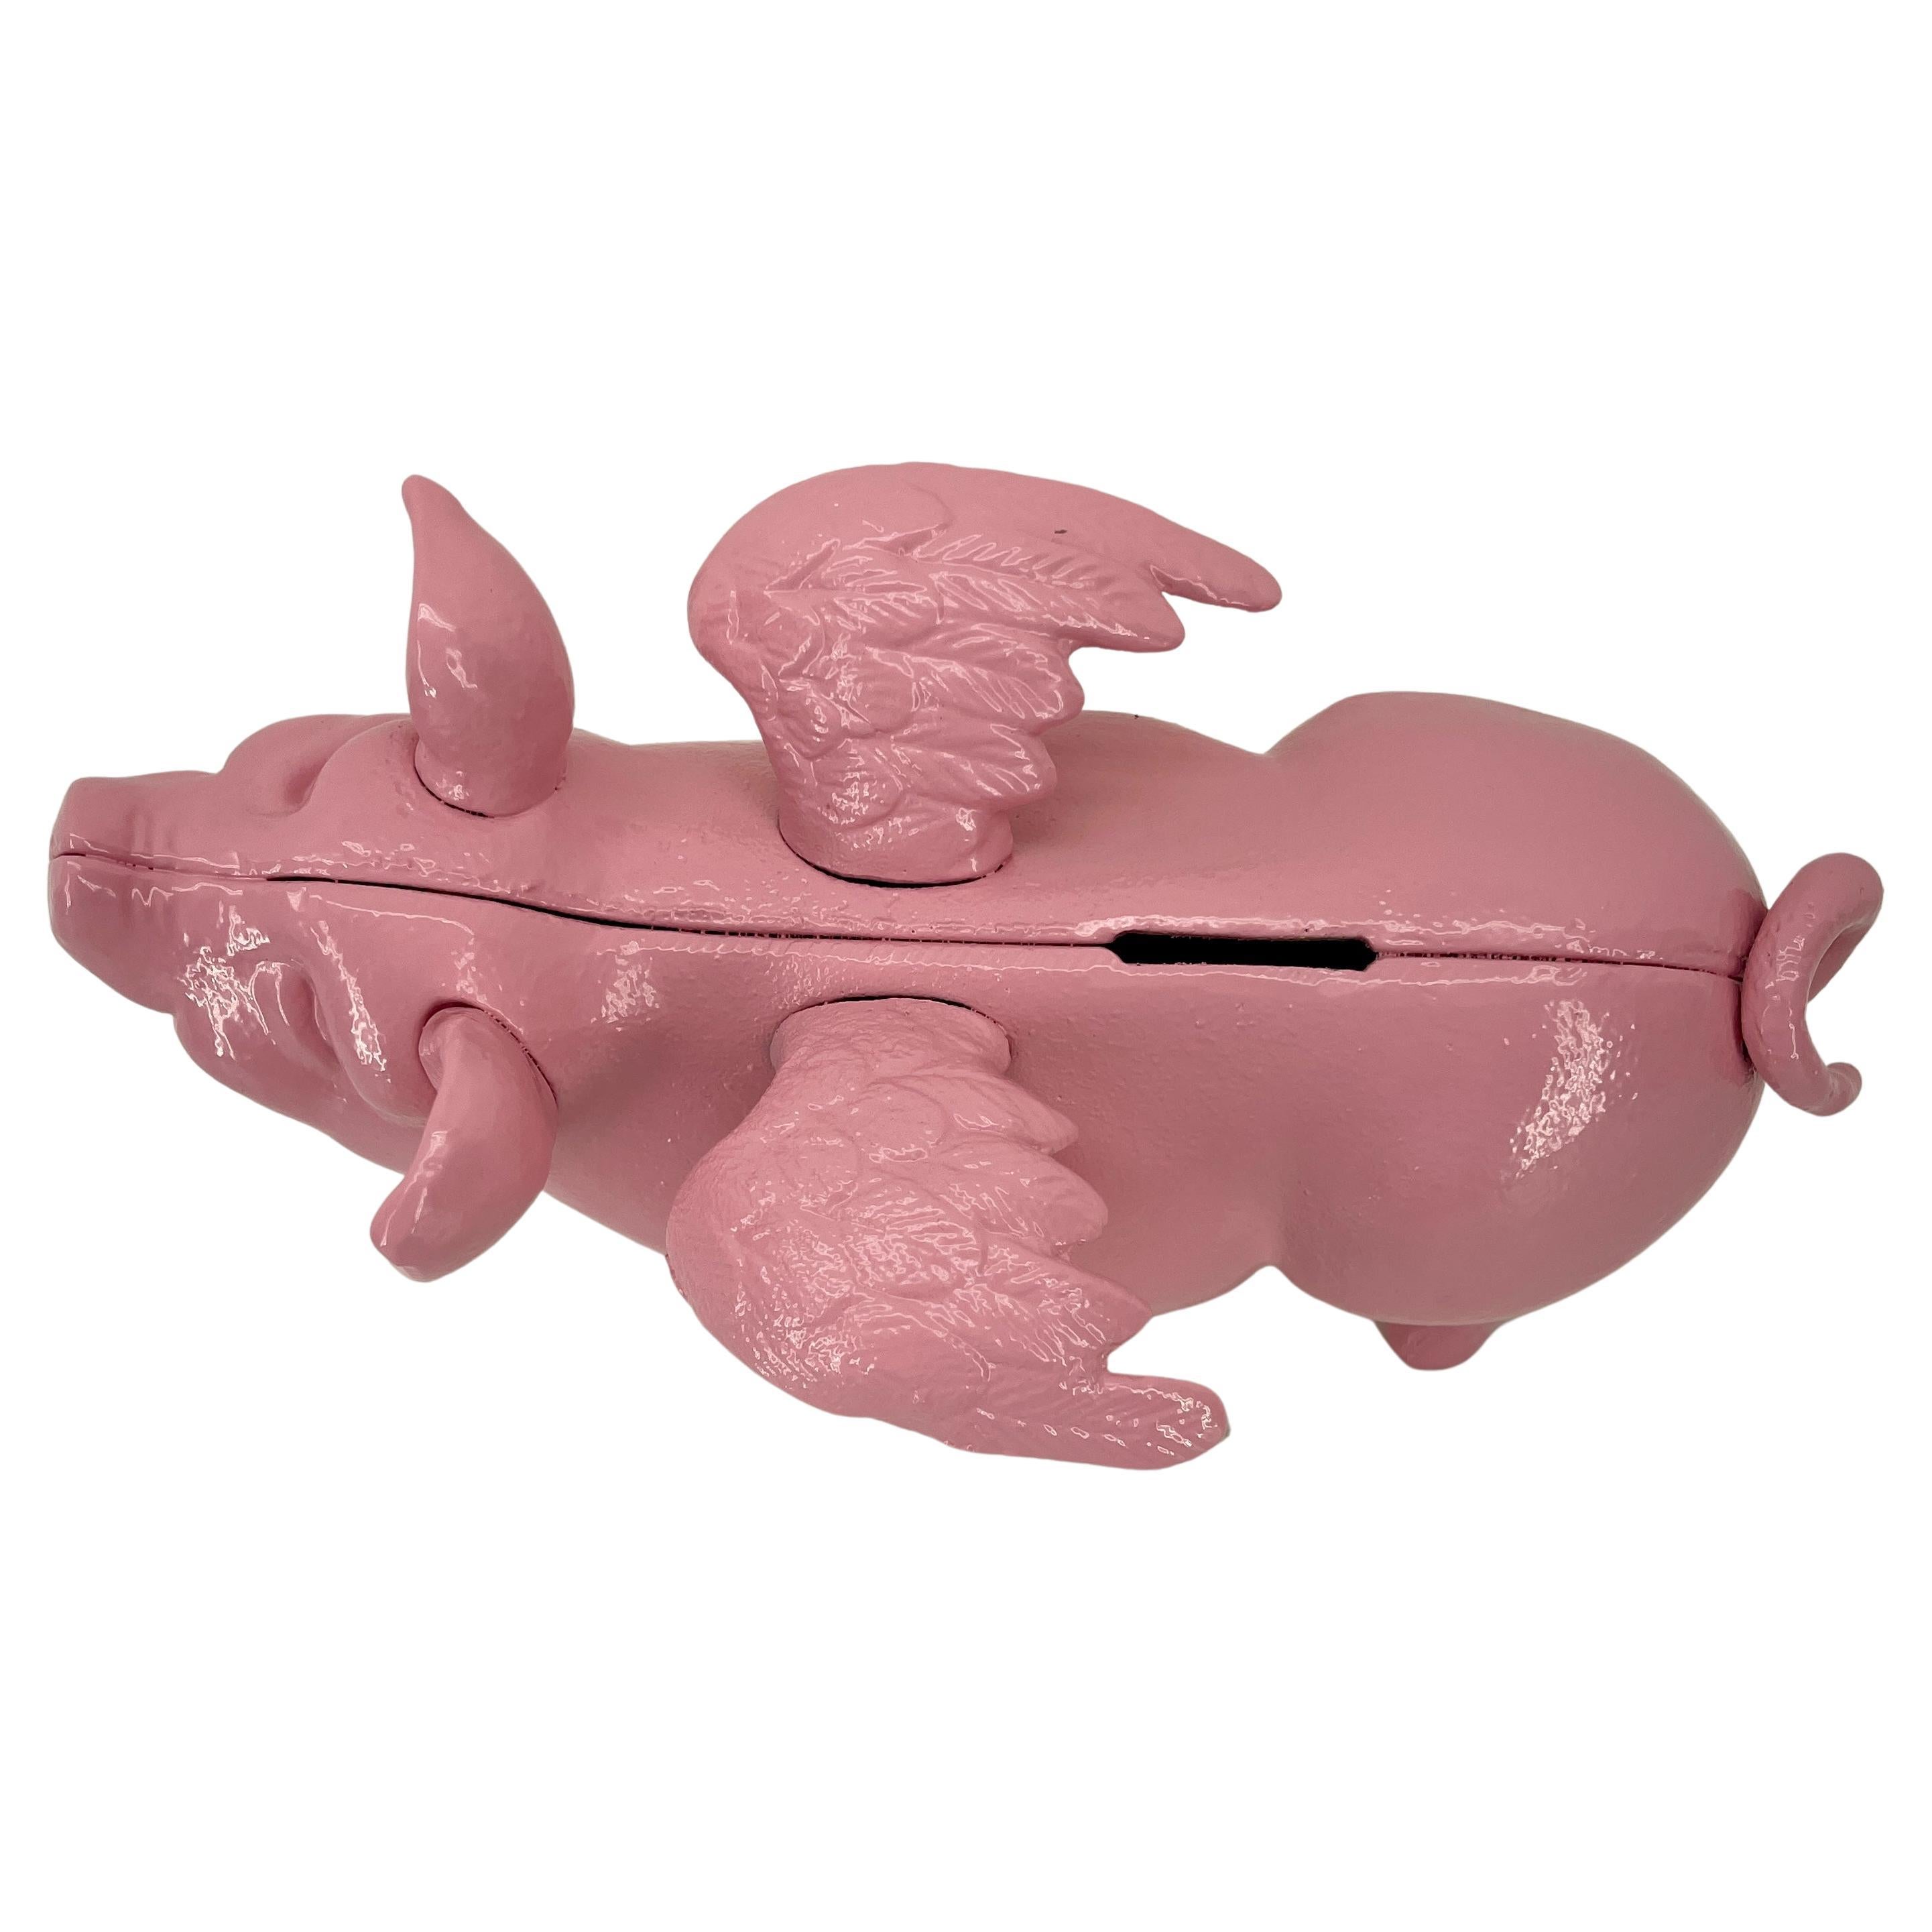 Large Pink Cast Iron Pig Money Bank or Doorstop with Wings, Denmark In Good Condition For Sale In Haddonfield, NJ